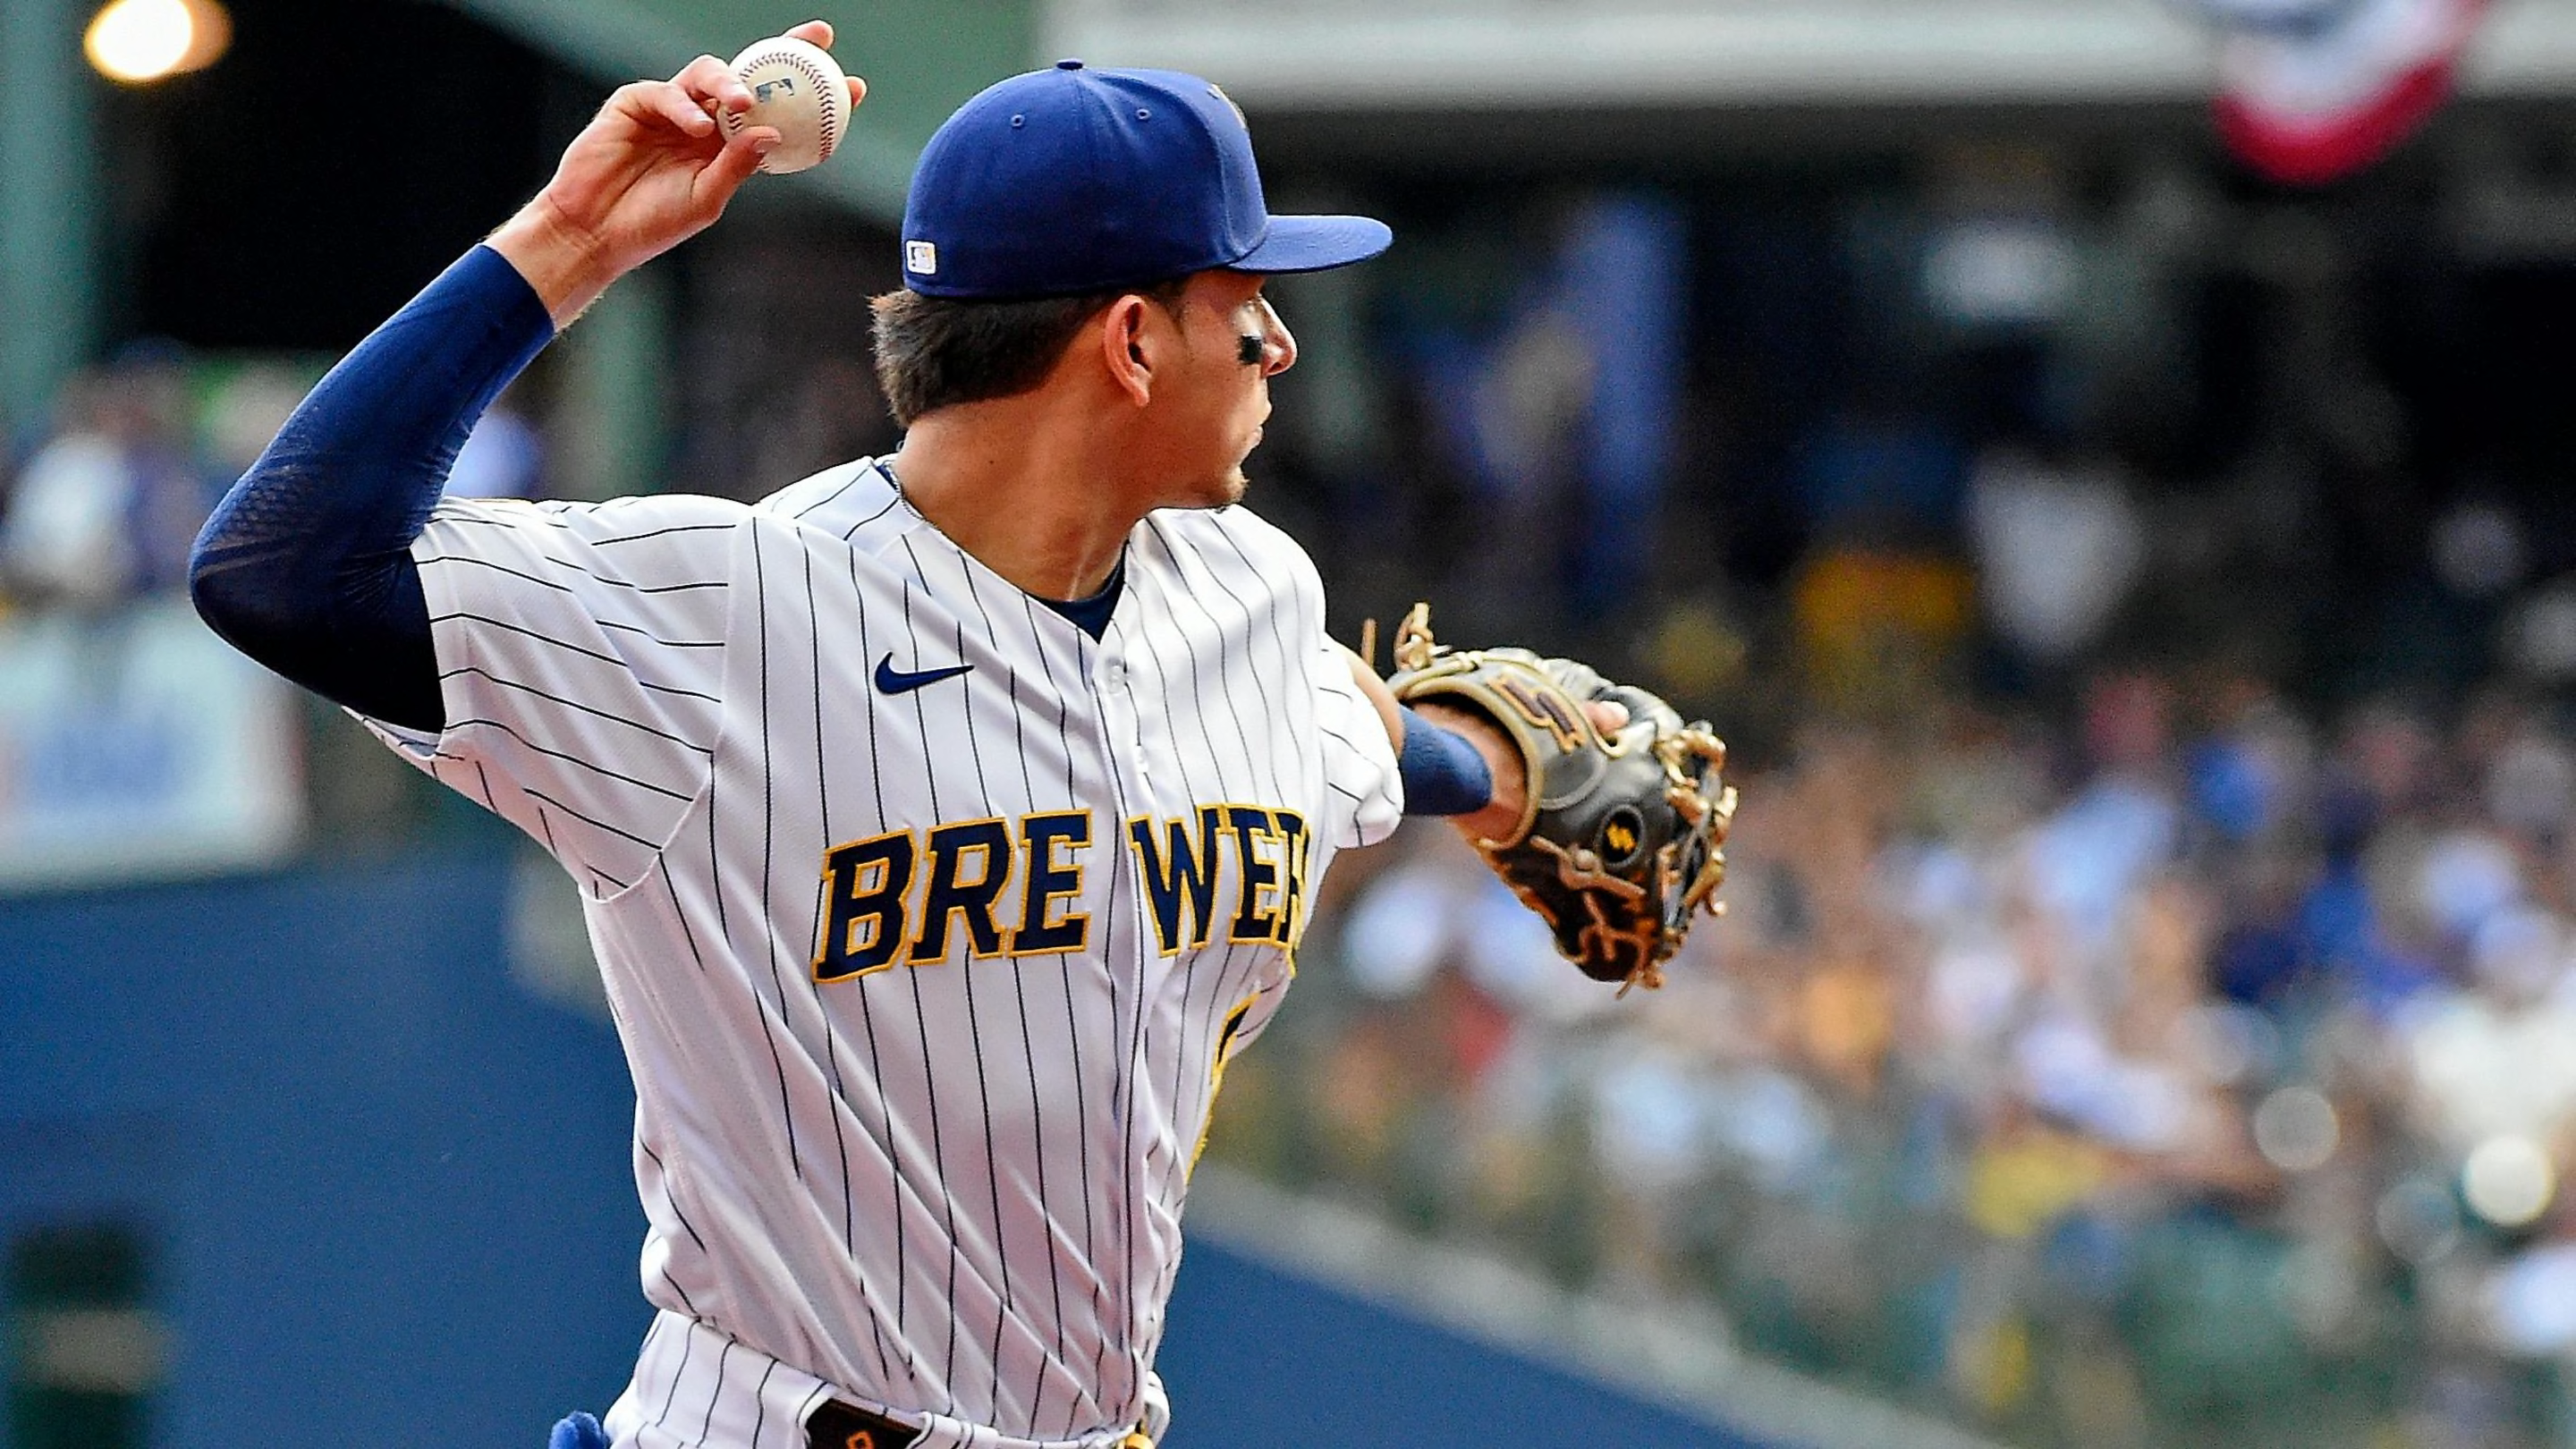 Luis Urias was supposed to be the Brewers Opening Day third baseman in 2022